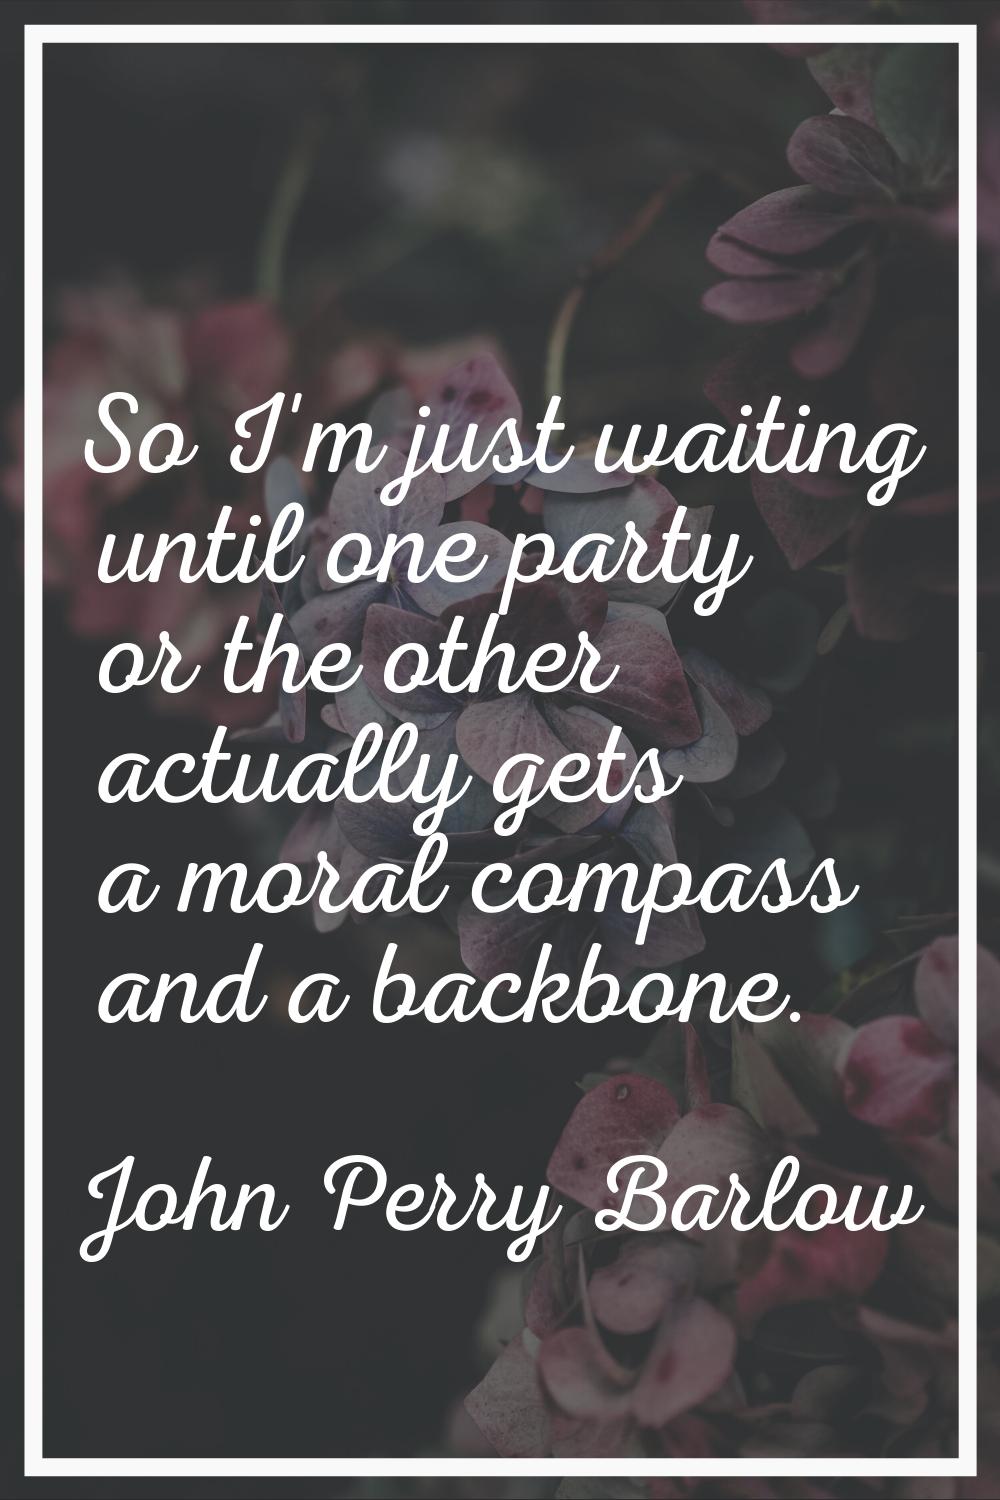 So I'm just waiting until one party or the other actually gets a moral compass and a backbone.